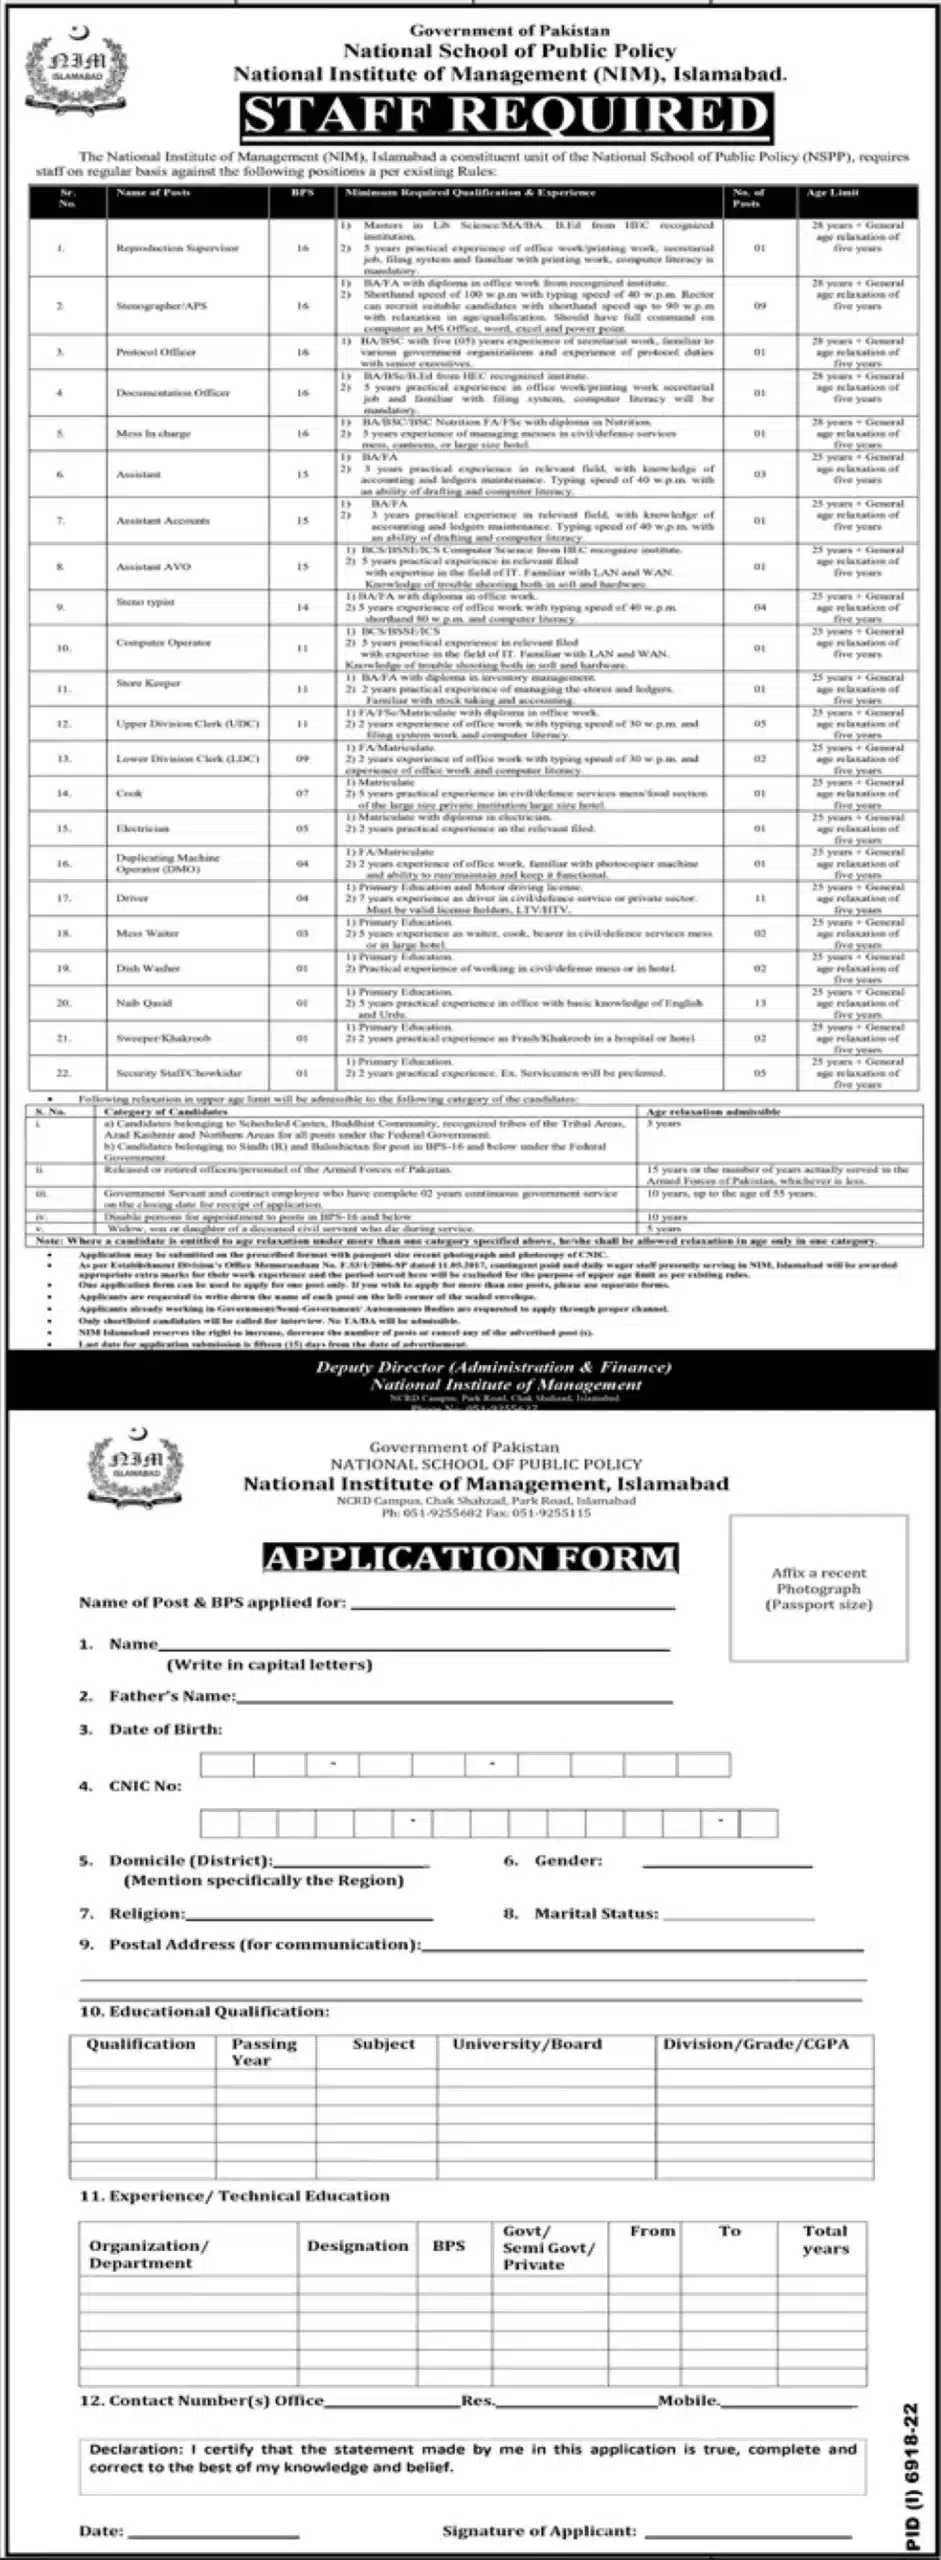 Latest National School of Public Policy NSPP Jobs 2023 